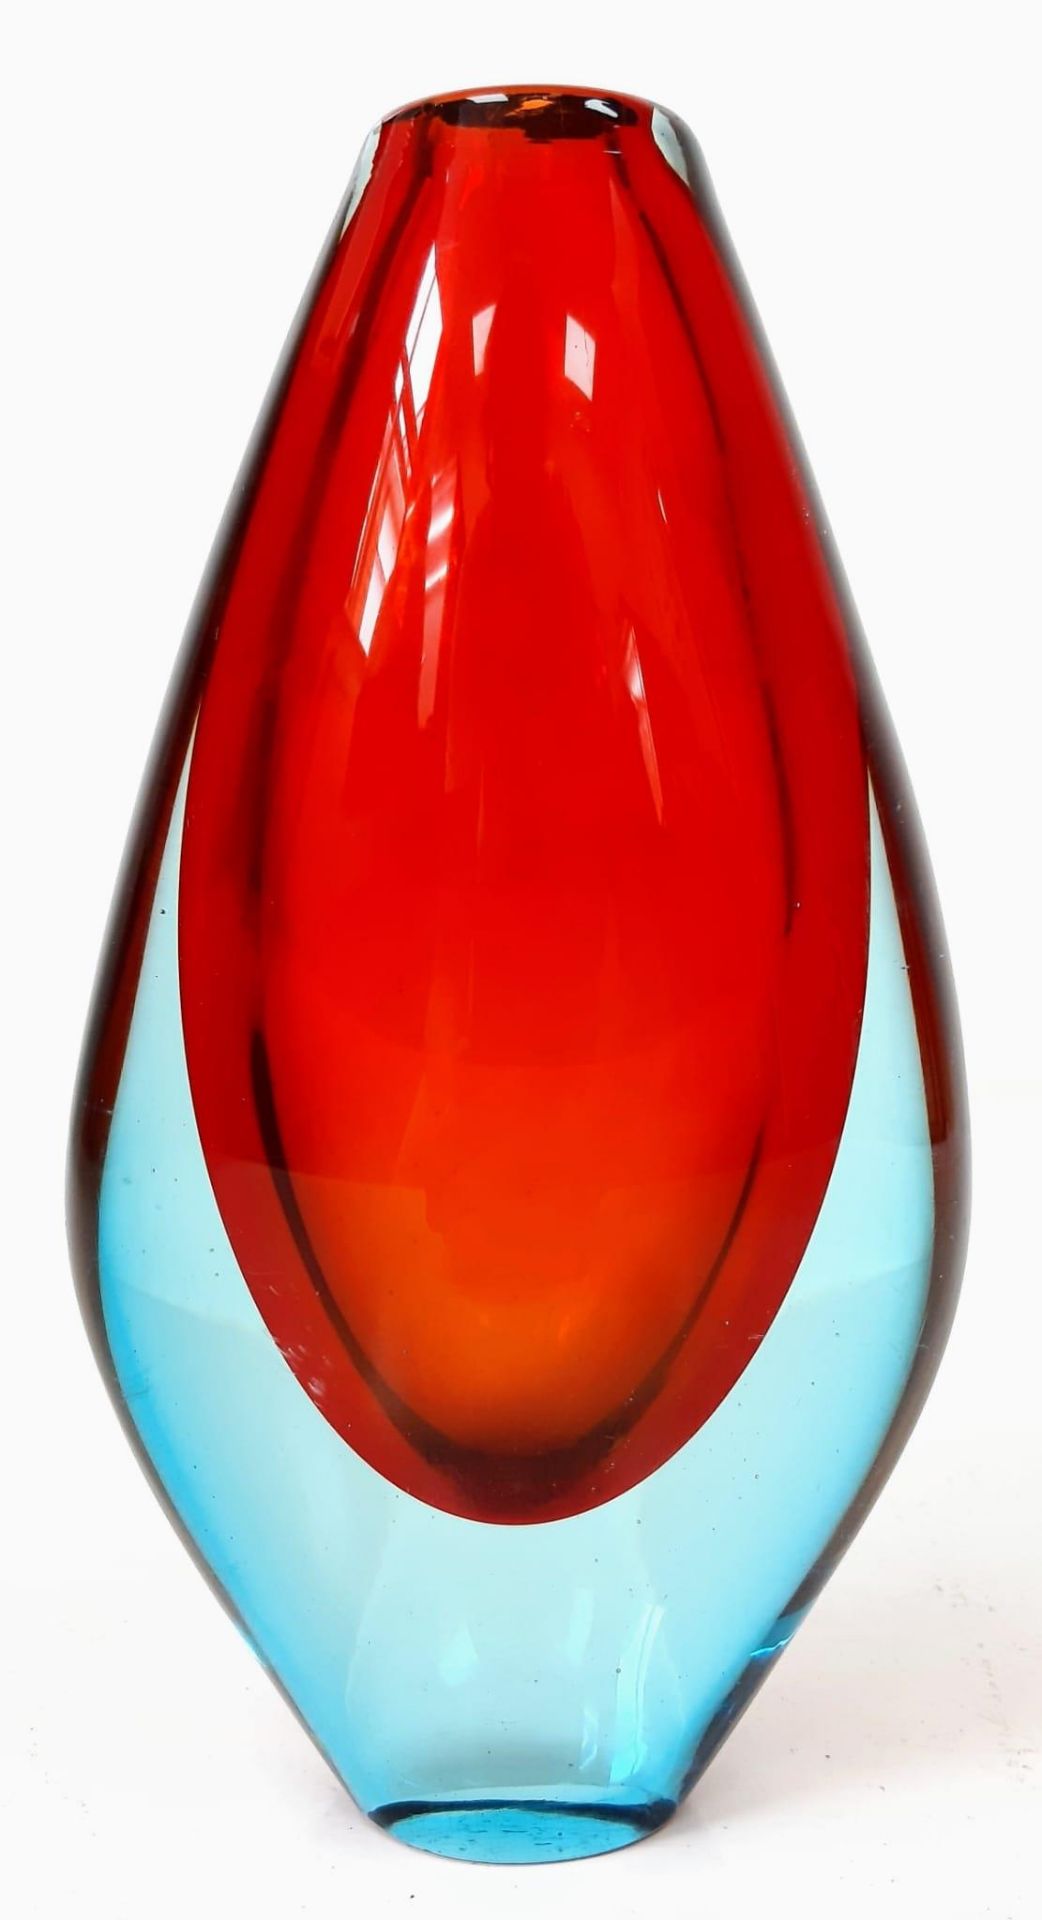 A Murano-Inspired Fire-Red and Sky-Blue Decorative Glass Vase. 24cm tall